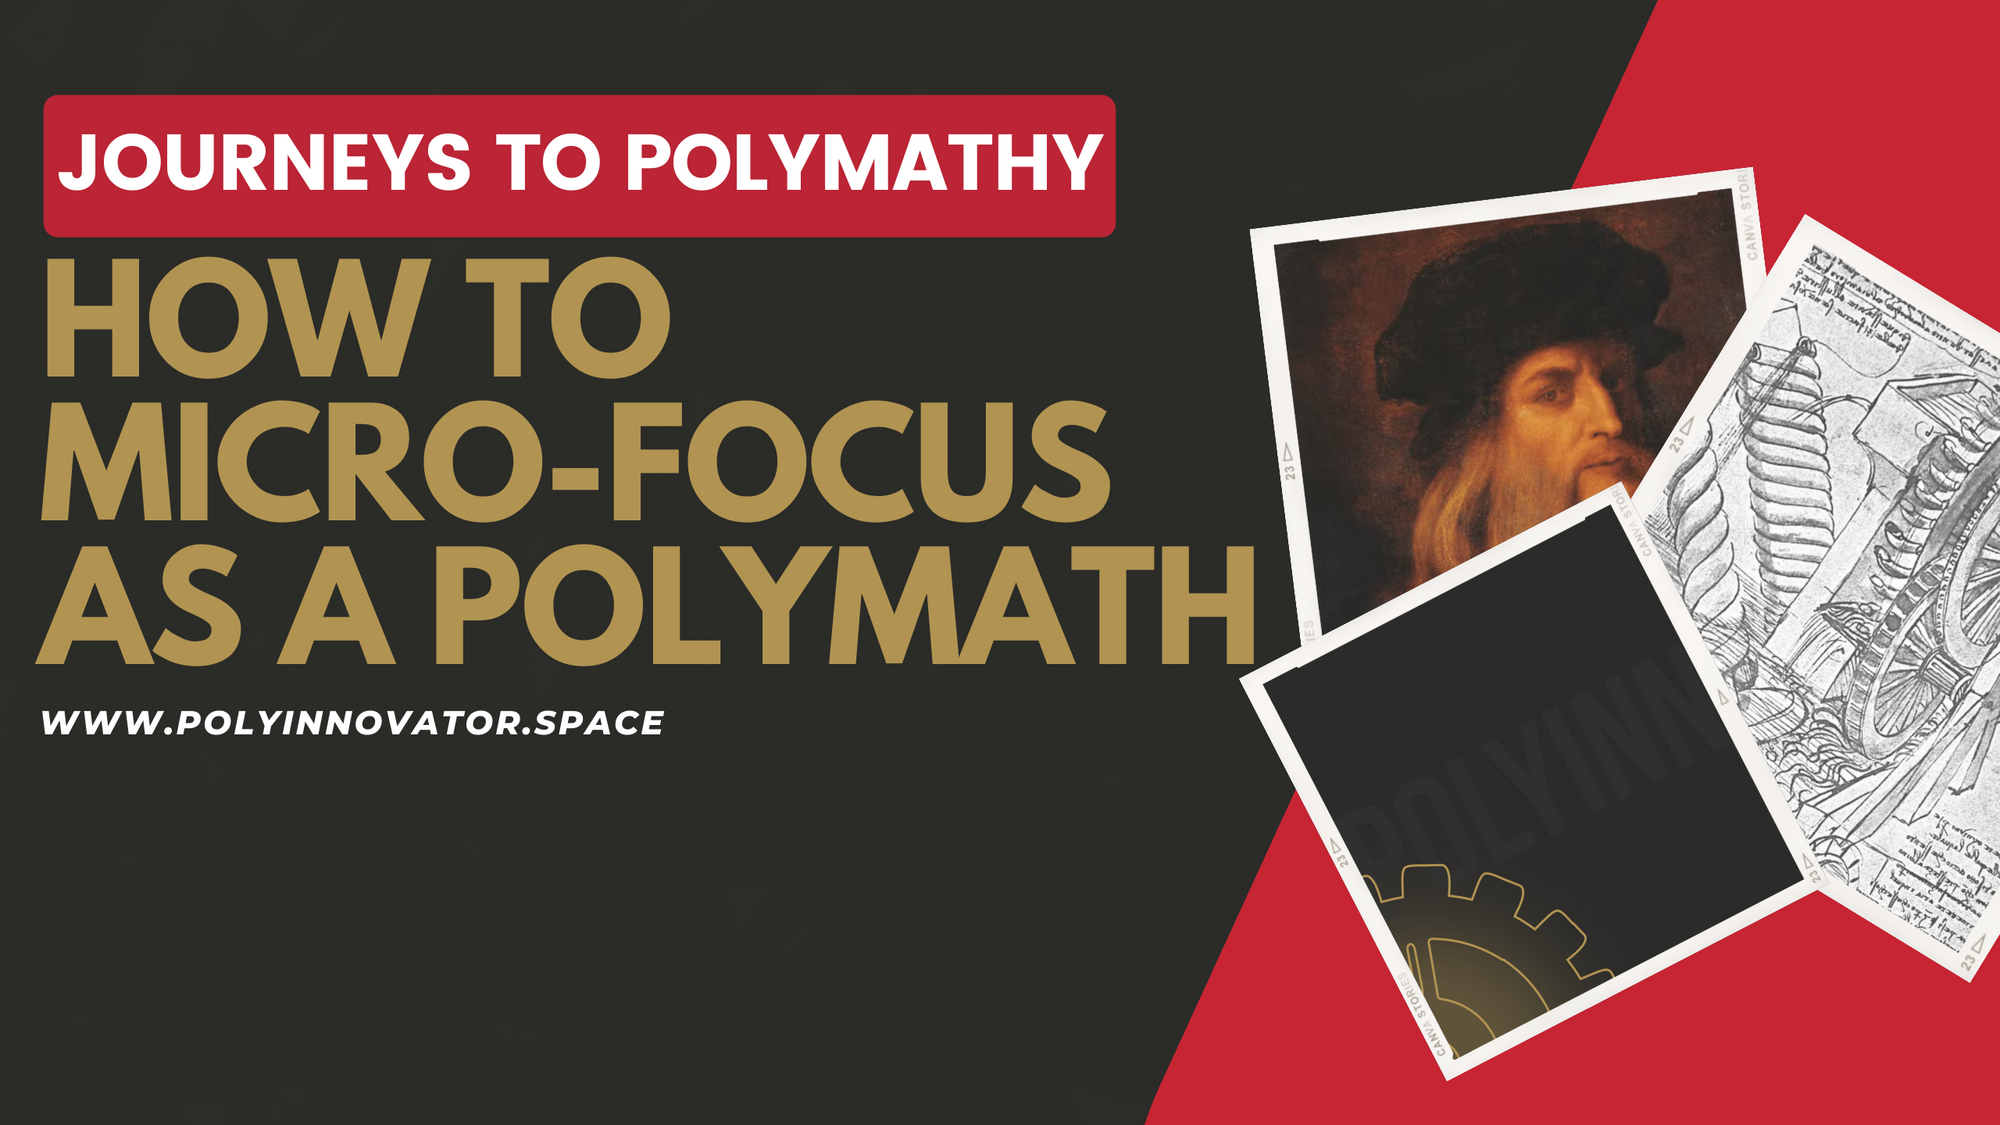 How to Micro-Focus as a Polymath